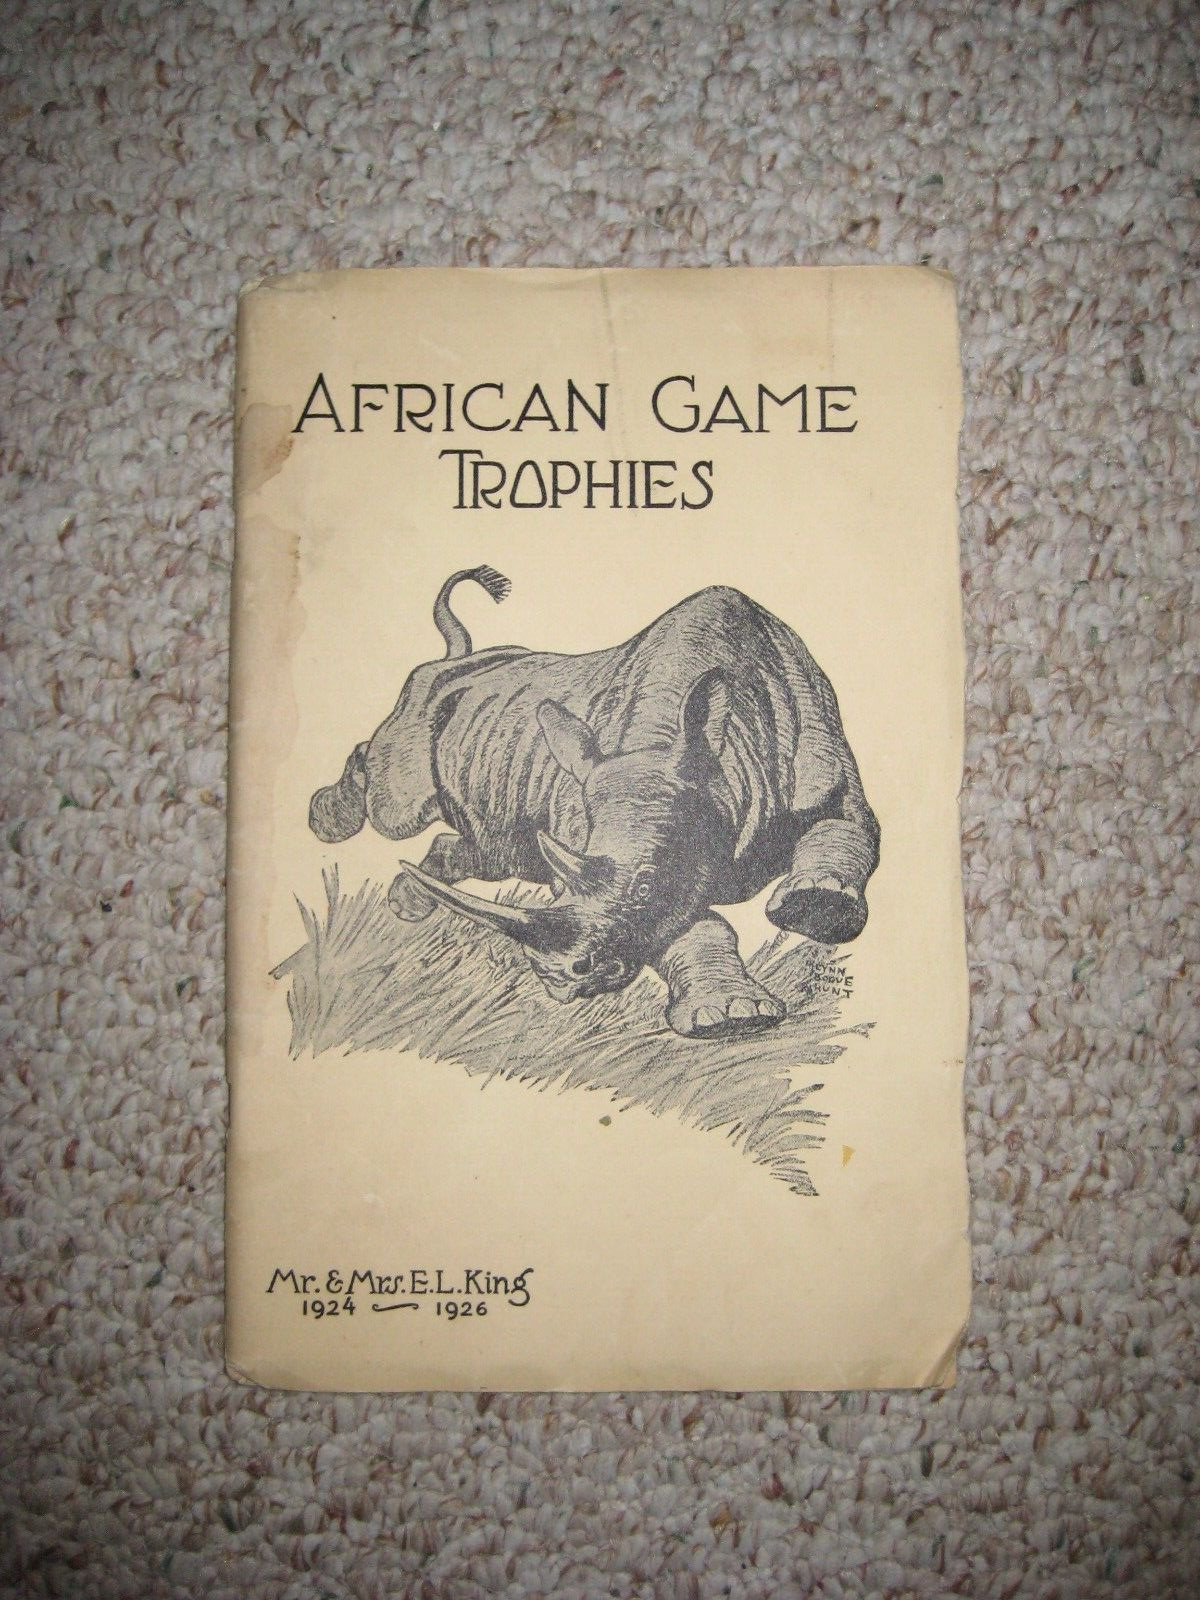 Vtg African Game Trophies Booklet Photos 1924-26  E.L. King Watkins Winona, MN